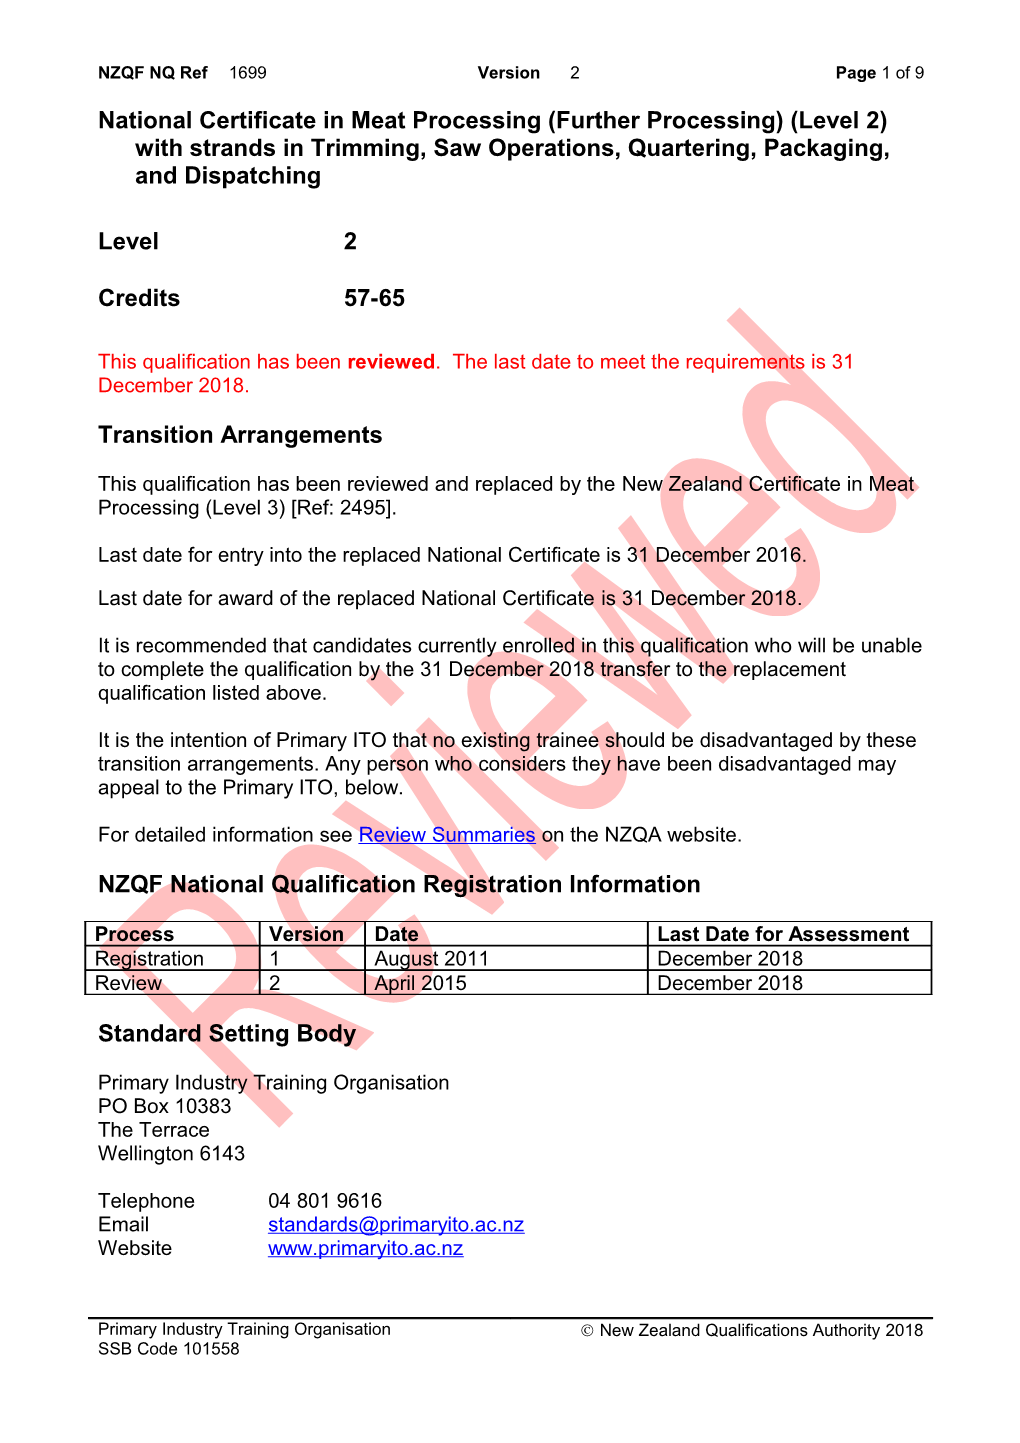 1699 National Certificate in Meat Processing (Further Processing) (Level 2) with Strands